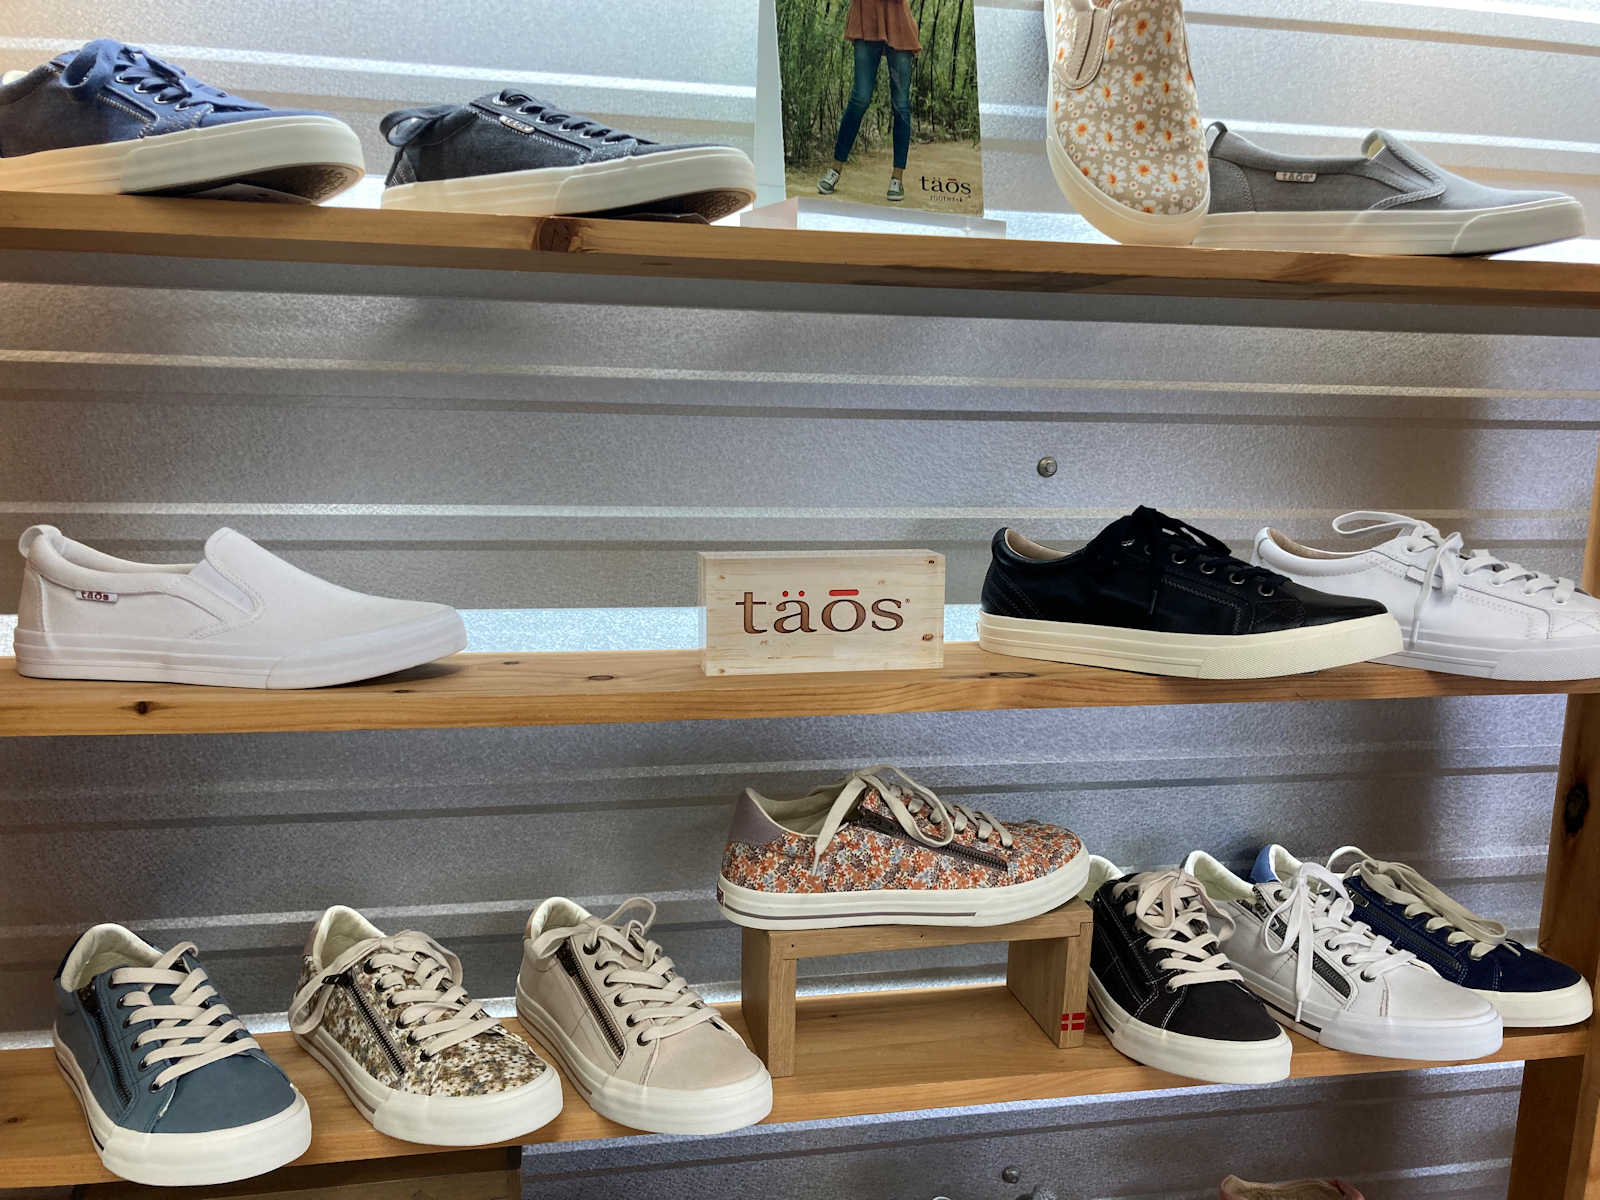 Display of Taos Women's Shoes